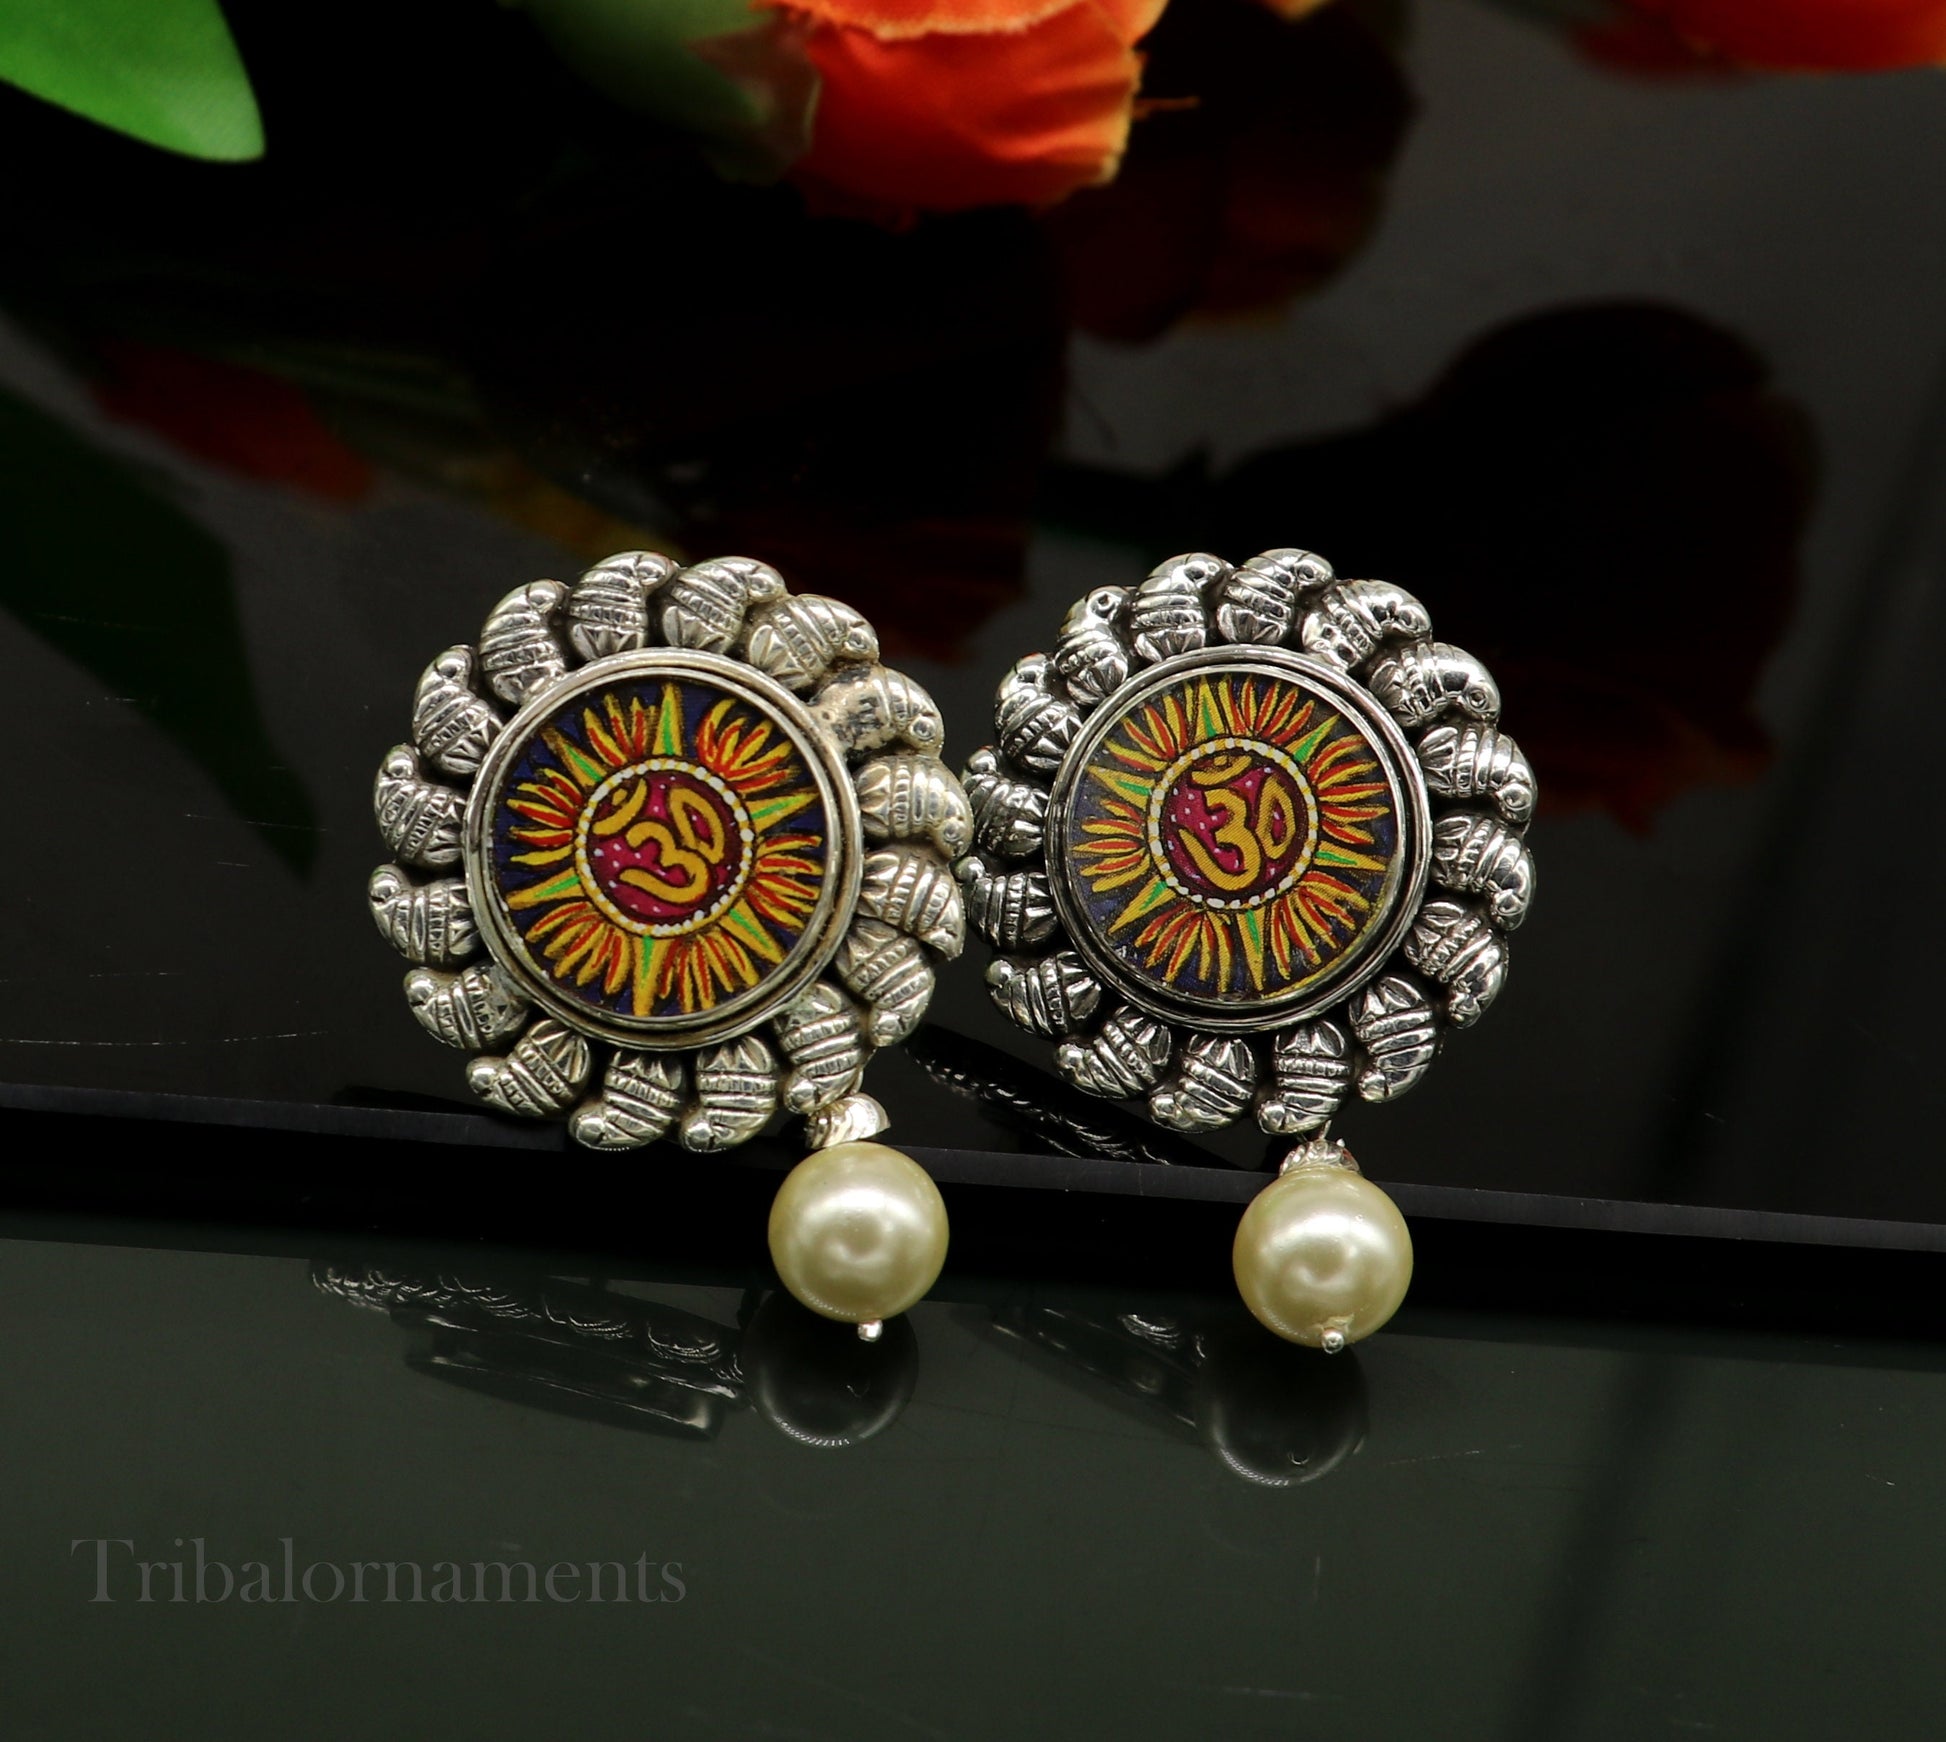 Divine Mantra "Aum' OM Stud earring Hand Painted Miniature Art photo Glass Framed 92.5 Sterling Silver ethnic earring stylish jewelry ear939 - TRIBAL ORNAMENTS